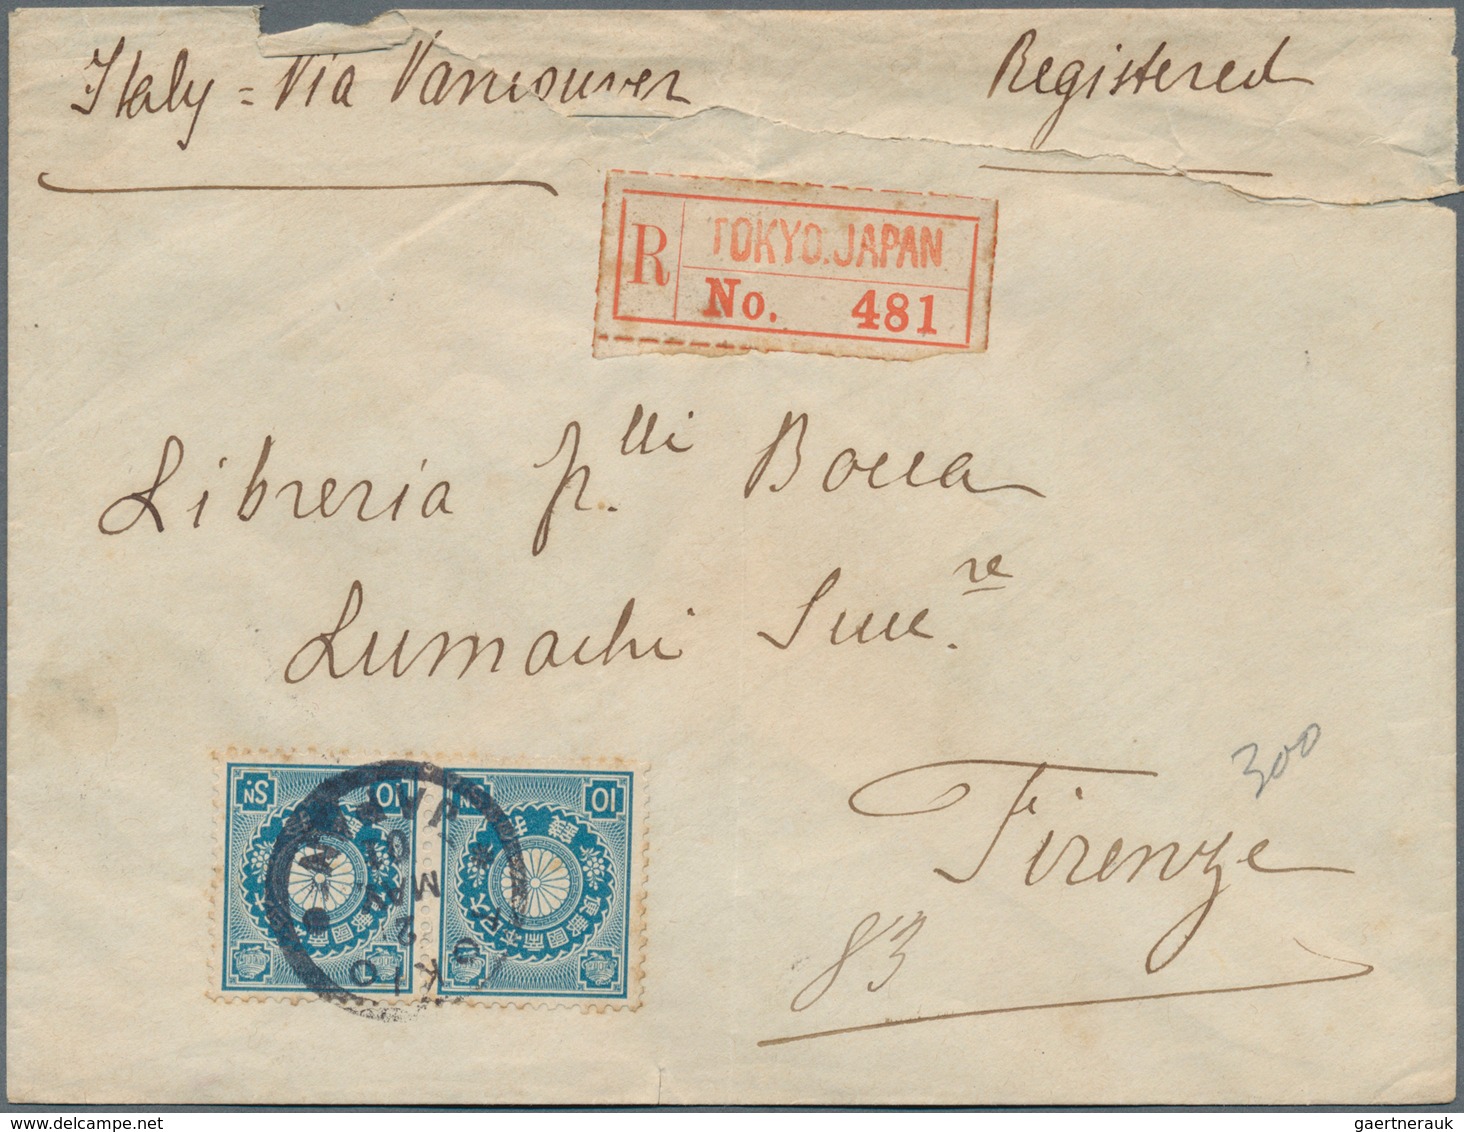 29460 Japan: 1876/1914, covers (11 inc. registered x4) mostly to Italy inc. from "Institute for infectiono